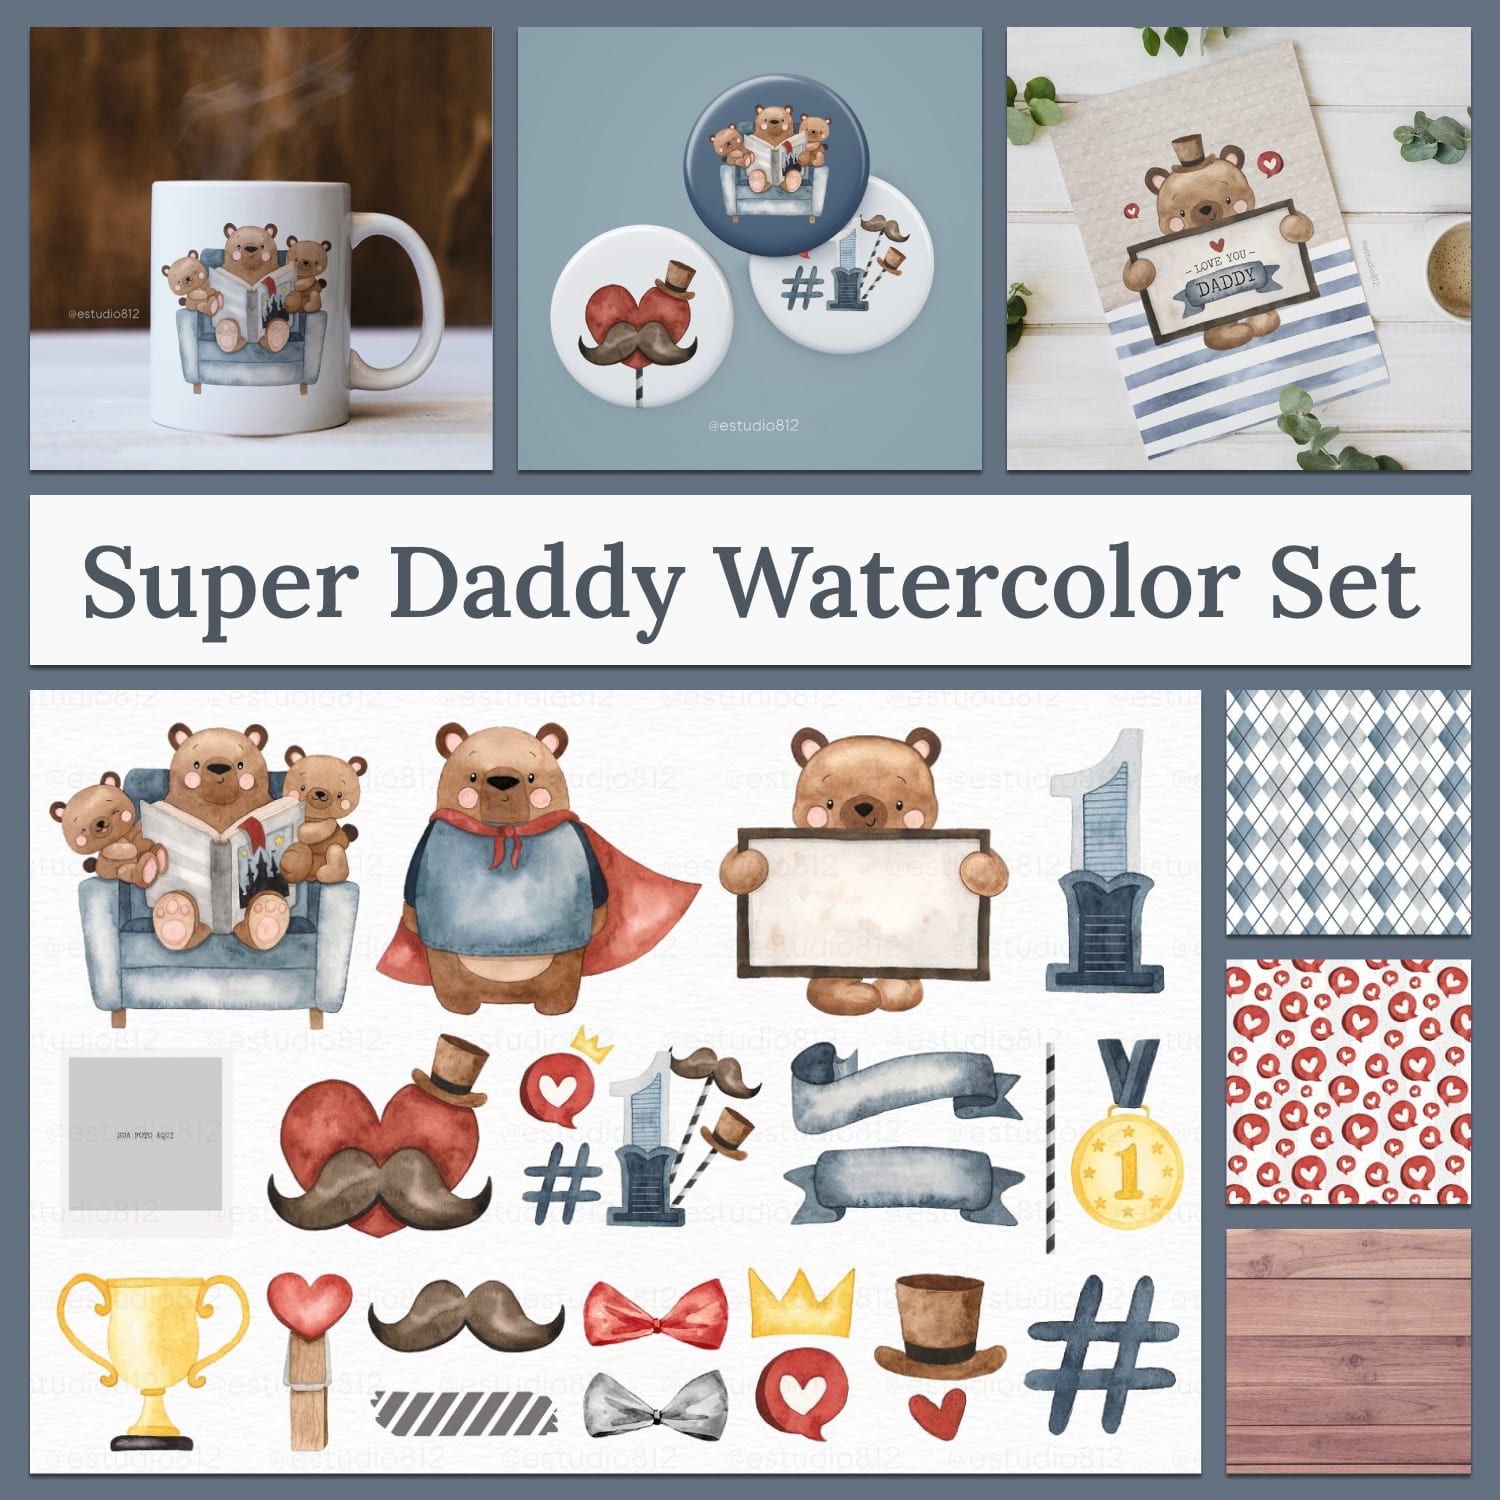 Super daddy watercolor set - main image preview.